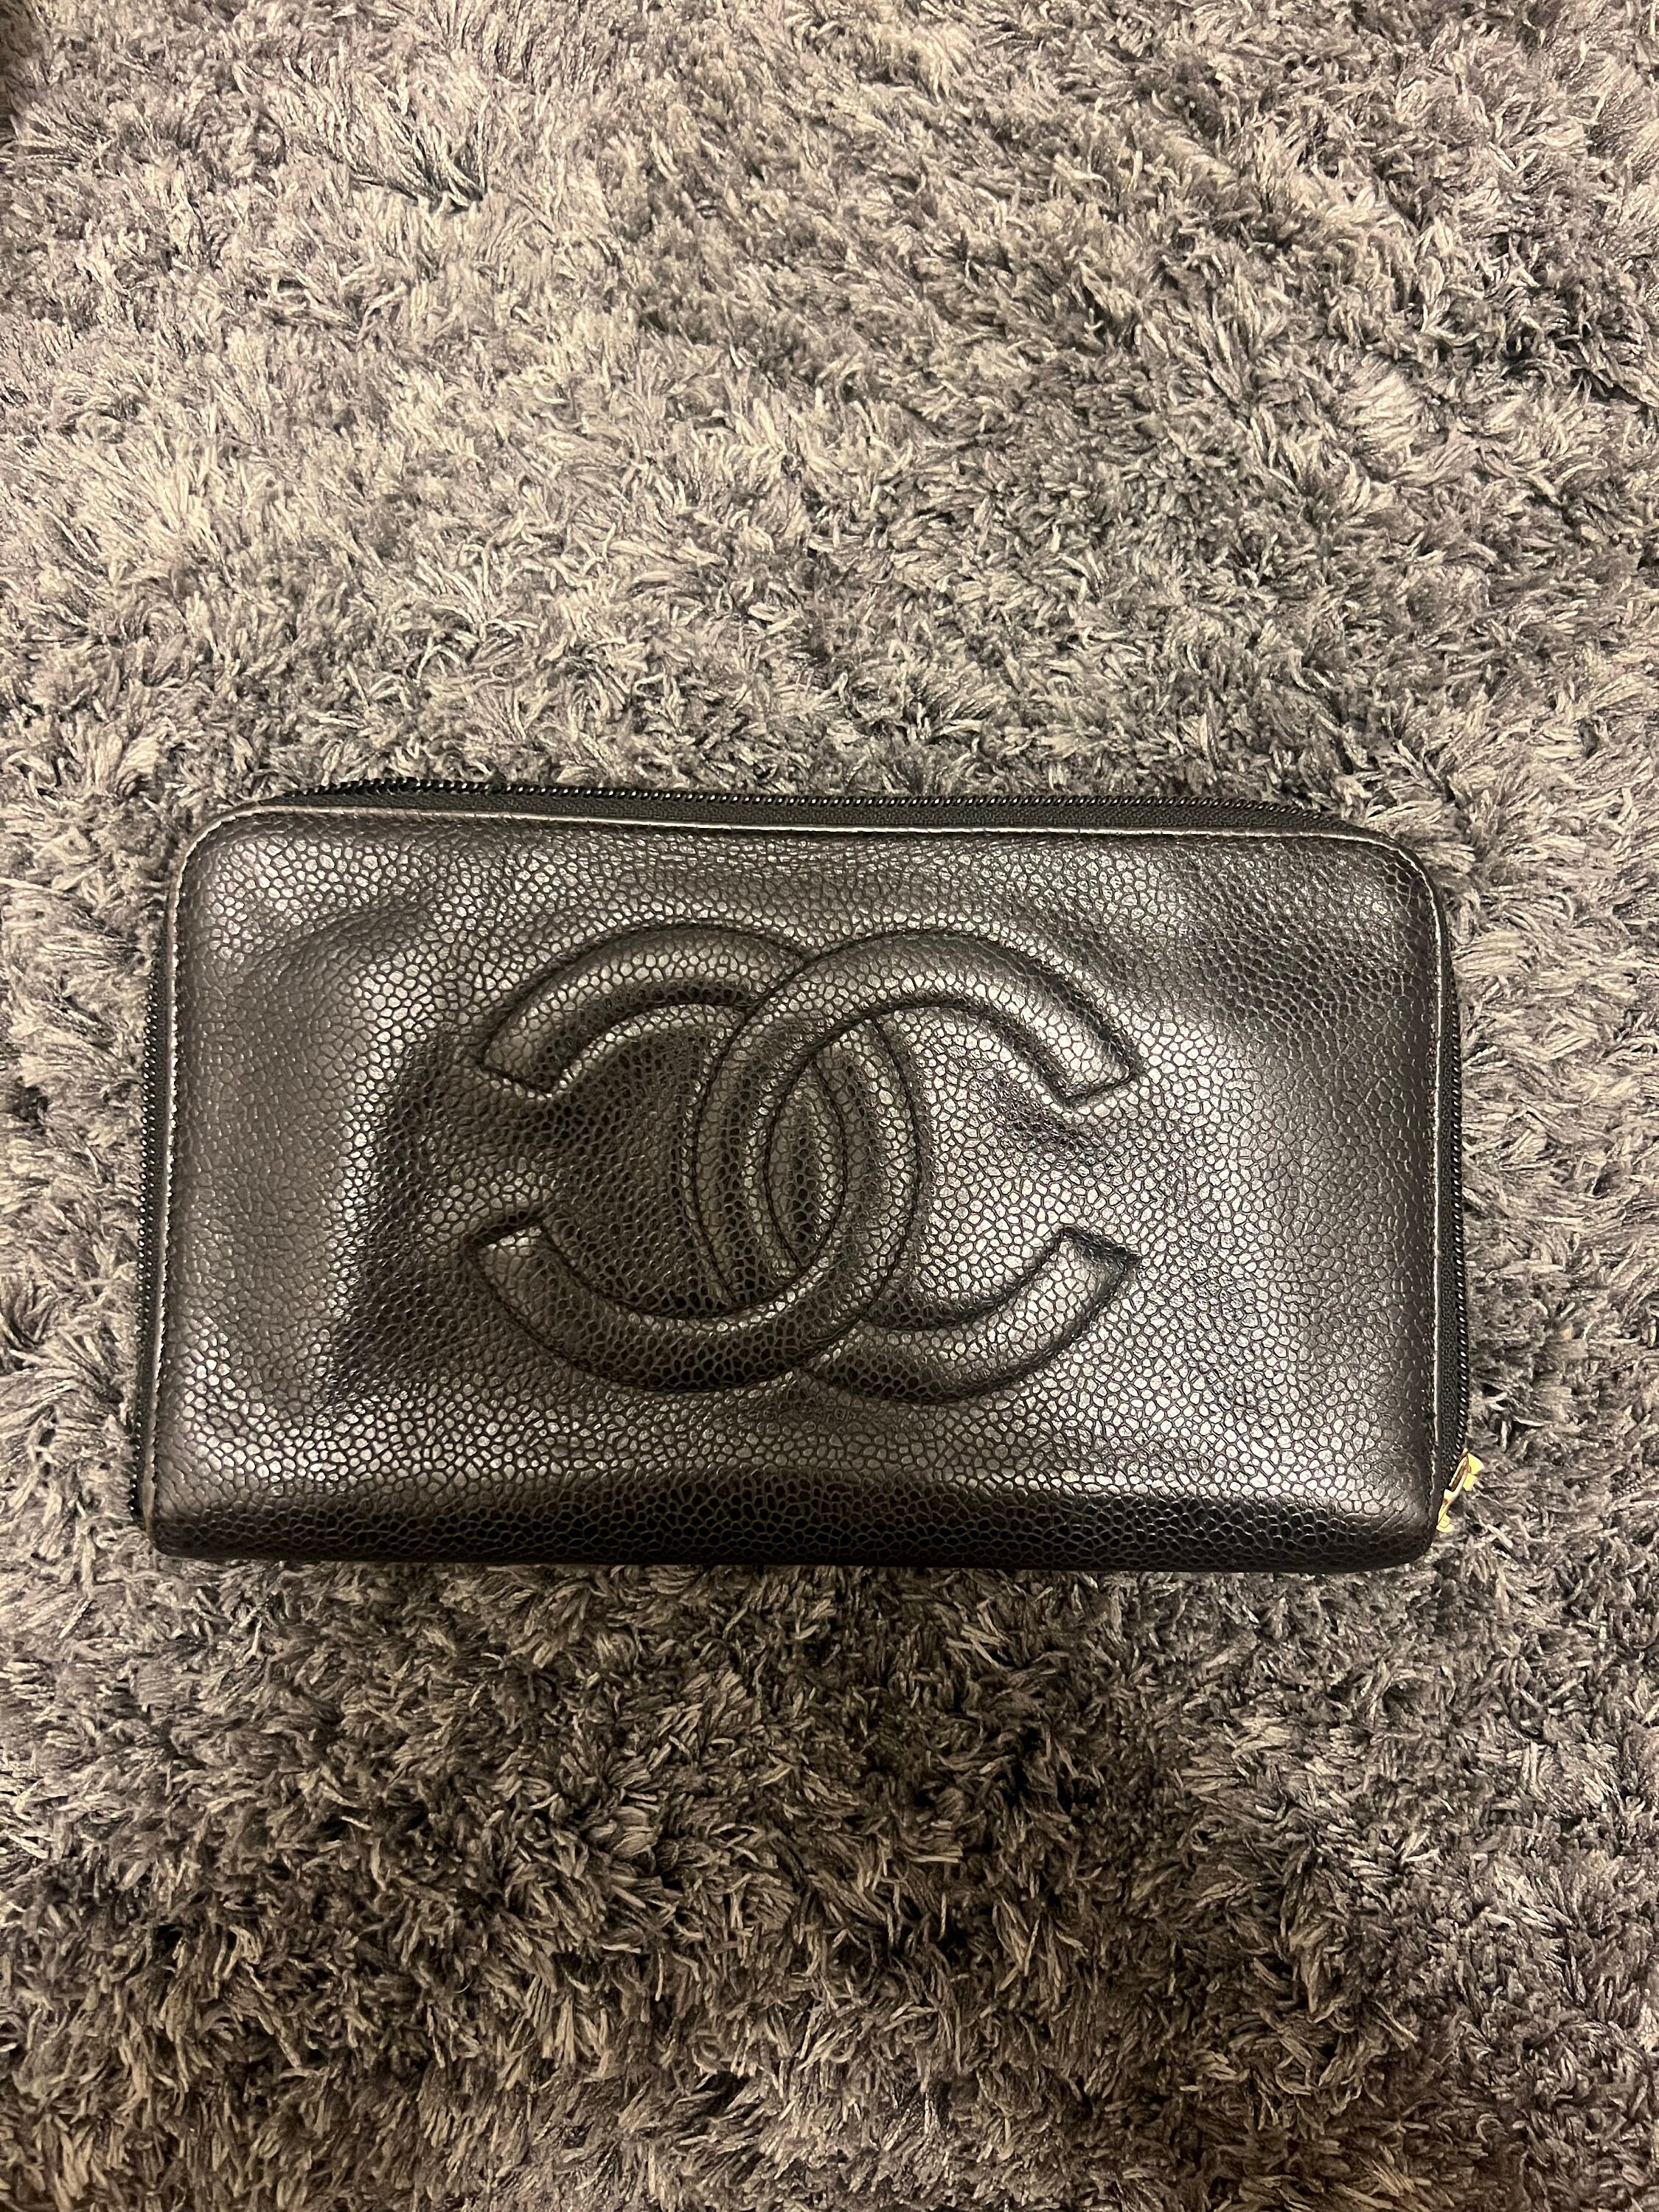 Upcycled Designer Wallet & Keychain - $45 New With Tags - From KadesKustoms